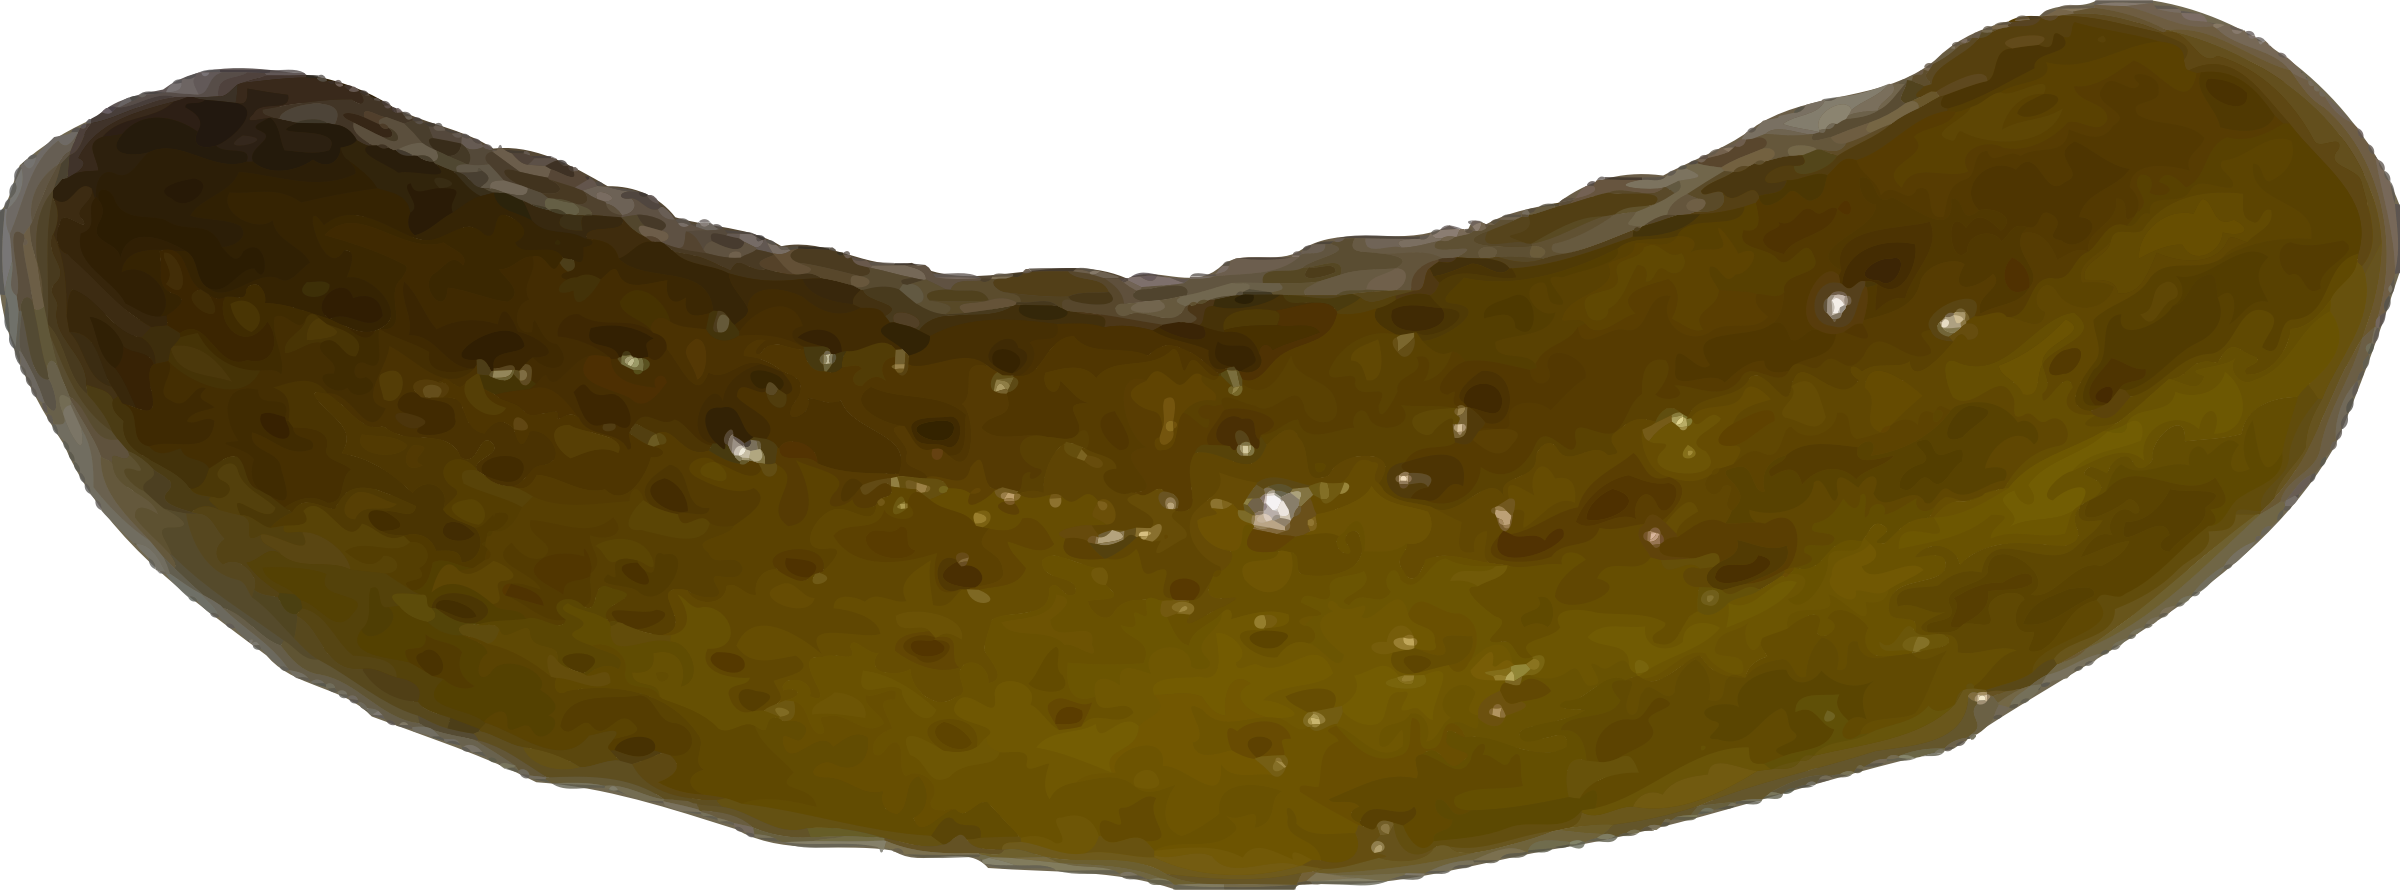 Picture #1884598 - pickle clipart gherkin. 